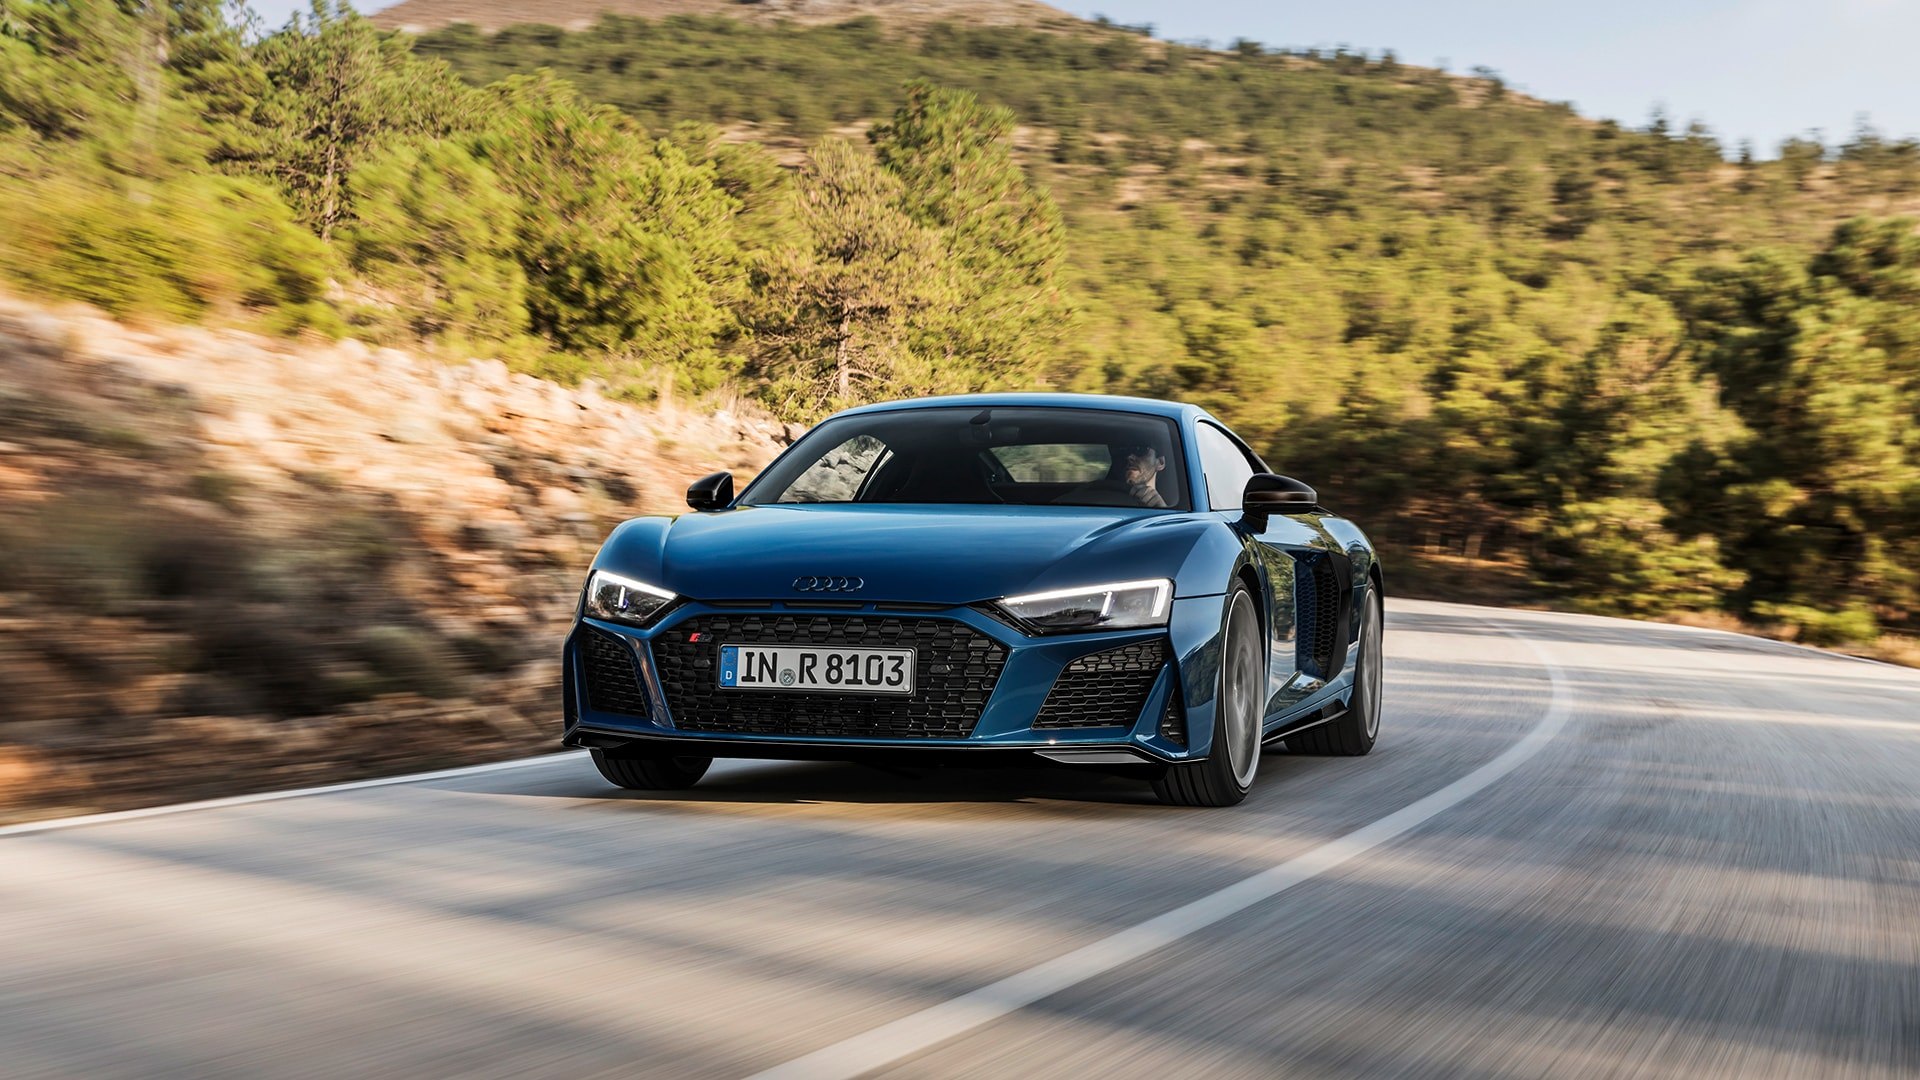 2020 Audi R8 Review, Price, Release Date, Images and More